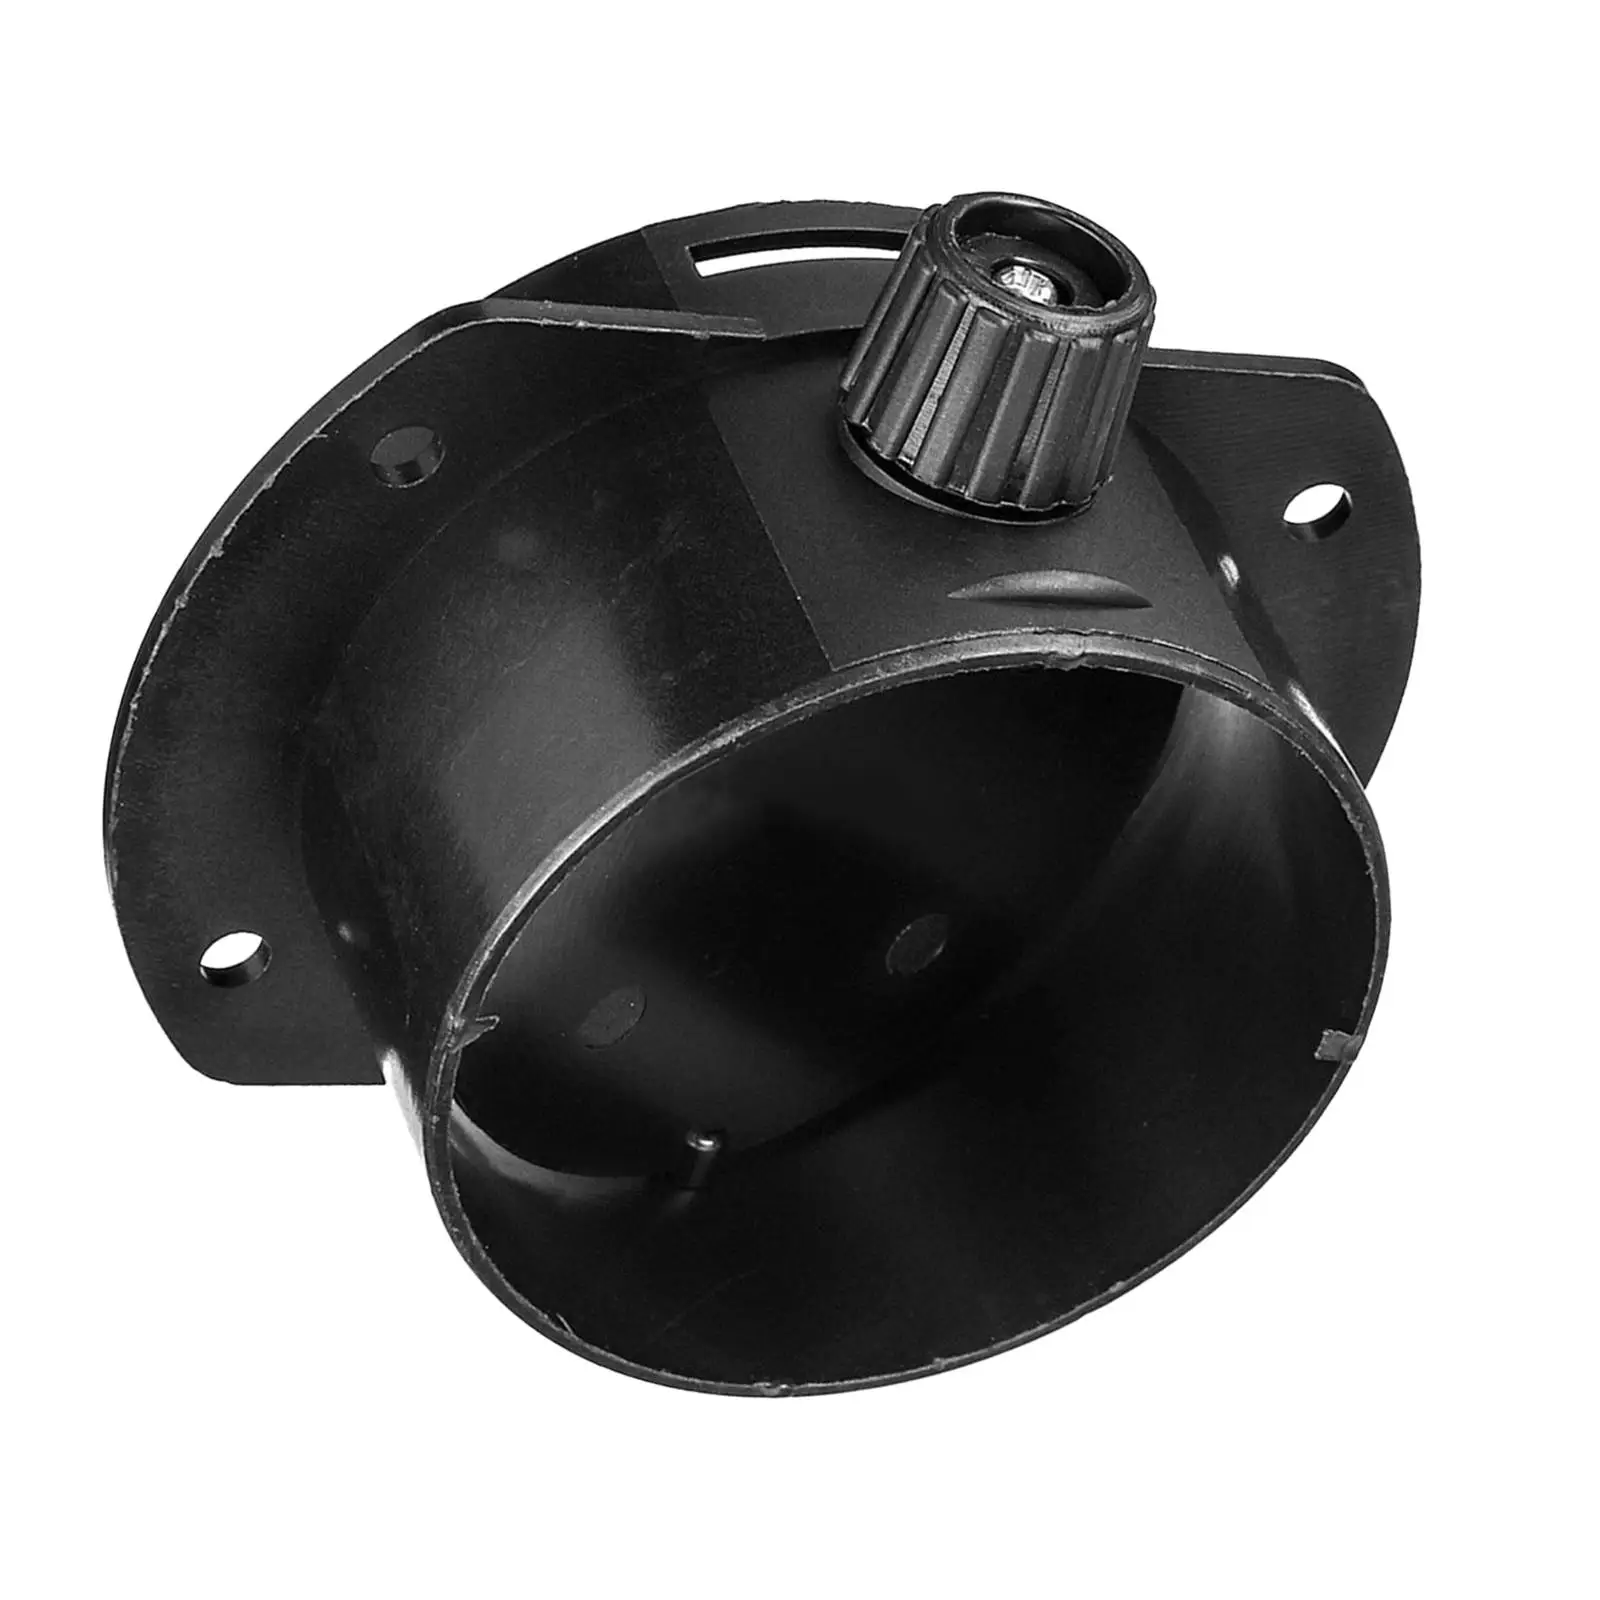 Auto Closeable Open Regulating Valve 90mm for Parking Heater RV